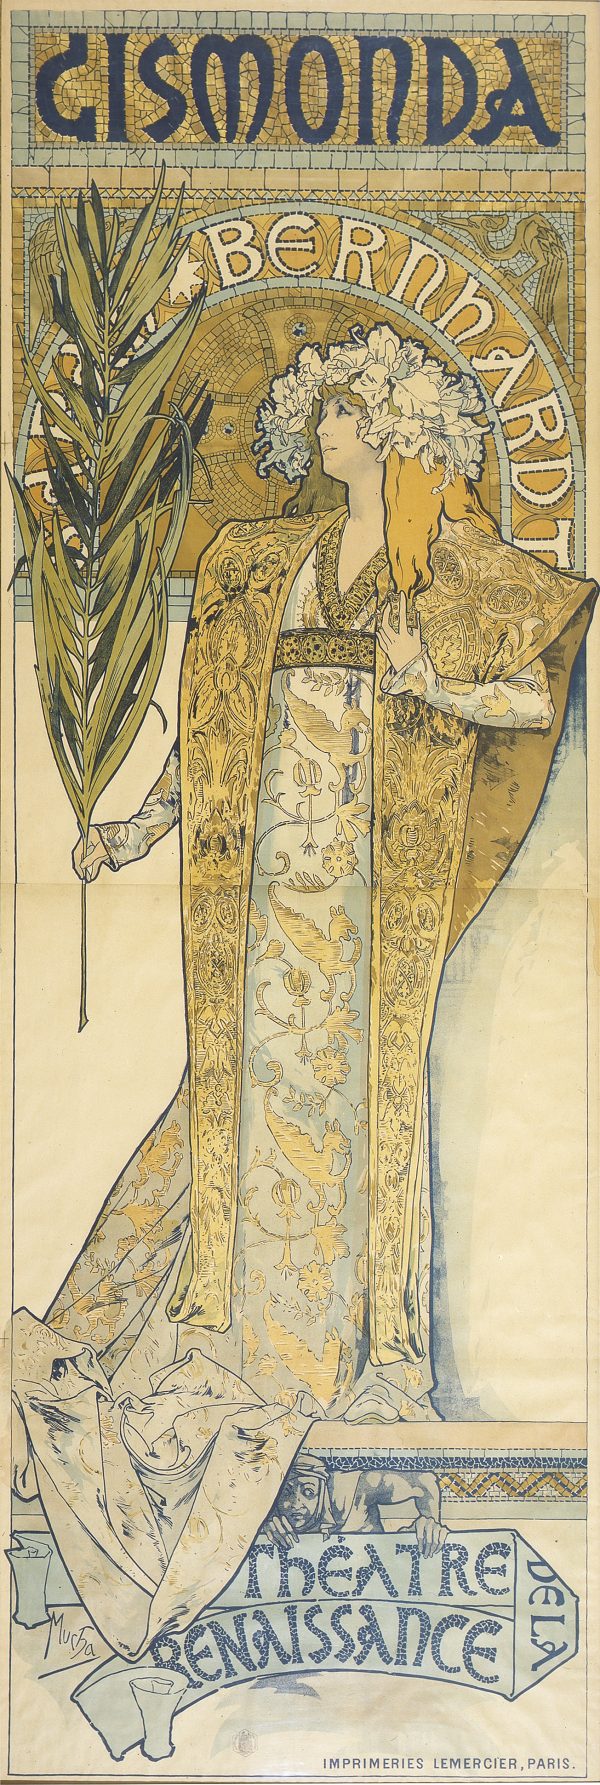 Illustration of a woman holding palm leaves with text Bernardt Theatre Renaissance